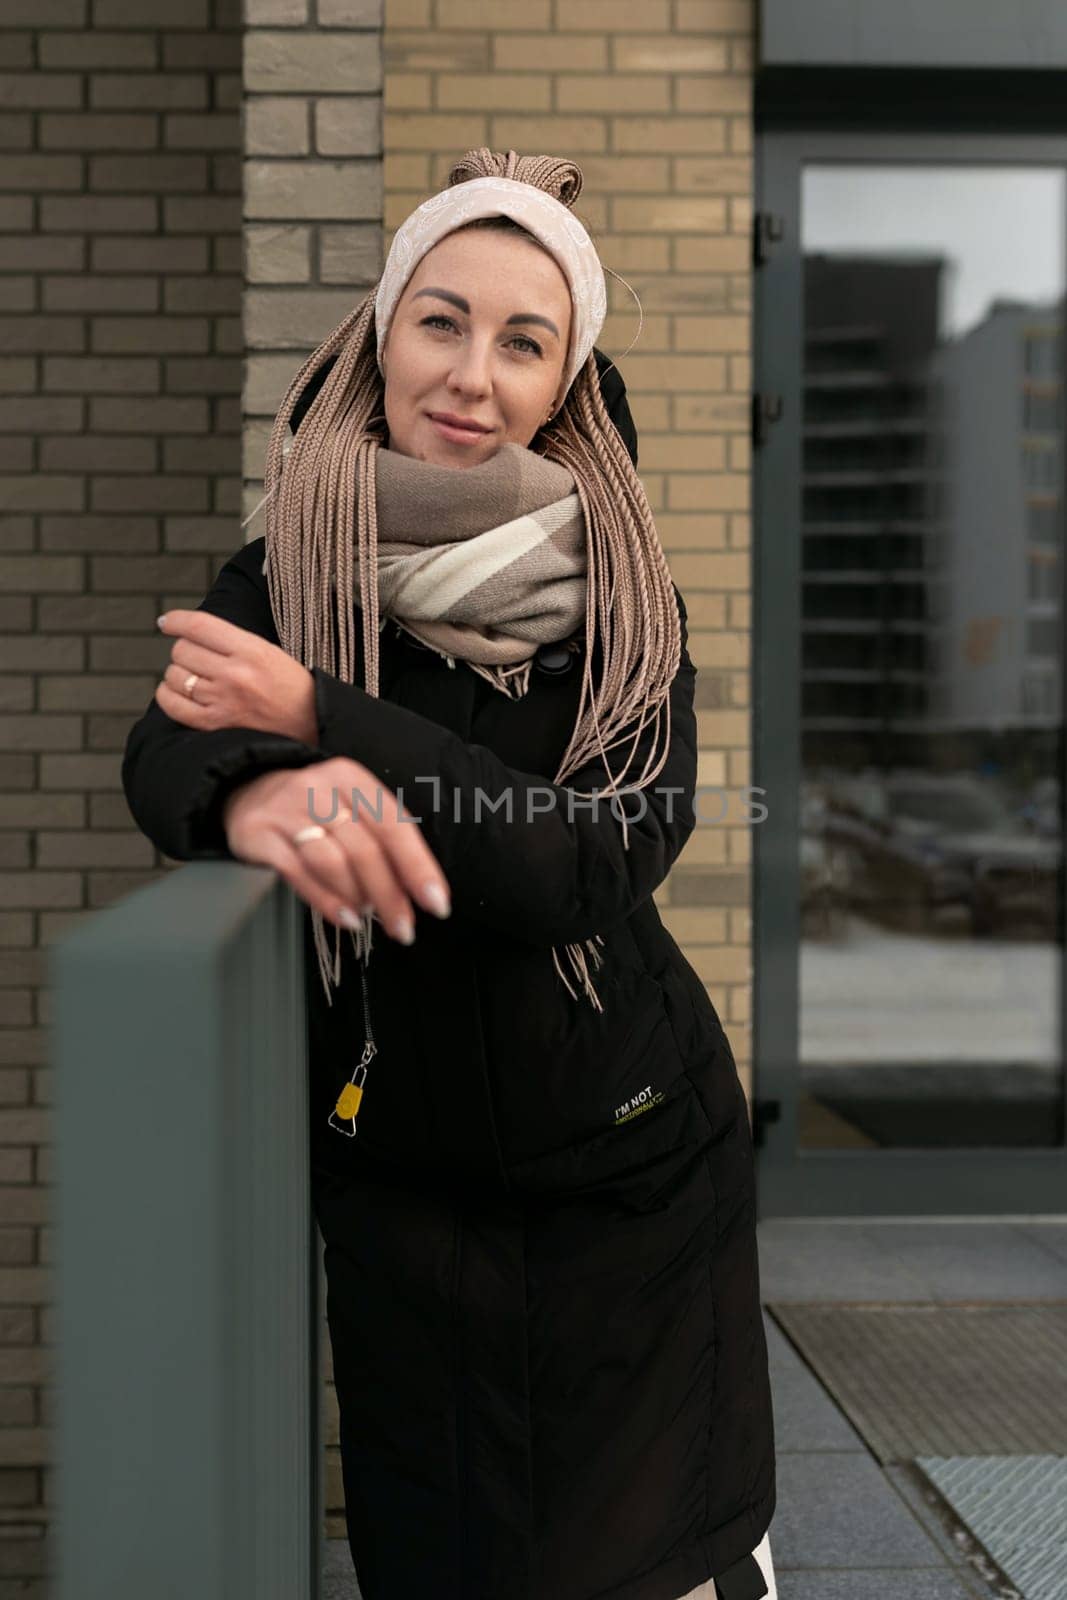 Well-groomed young woman dressed in a winter black coat with a scarf in an urban environment.